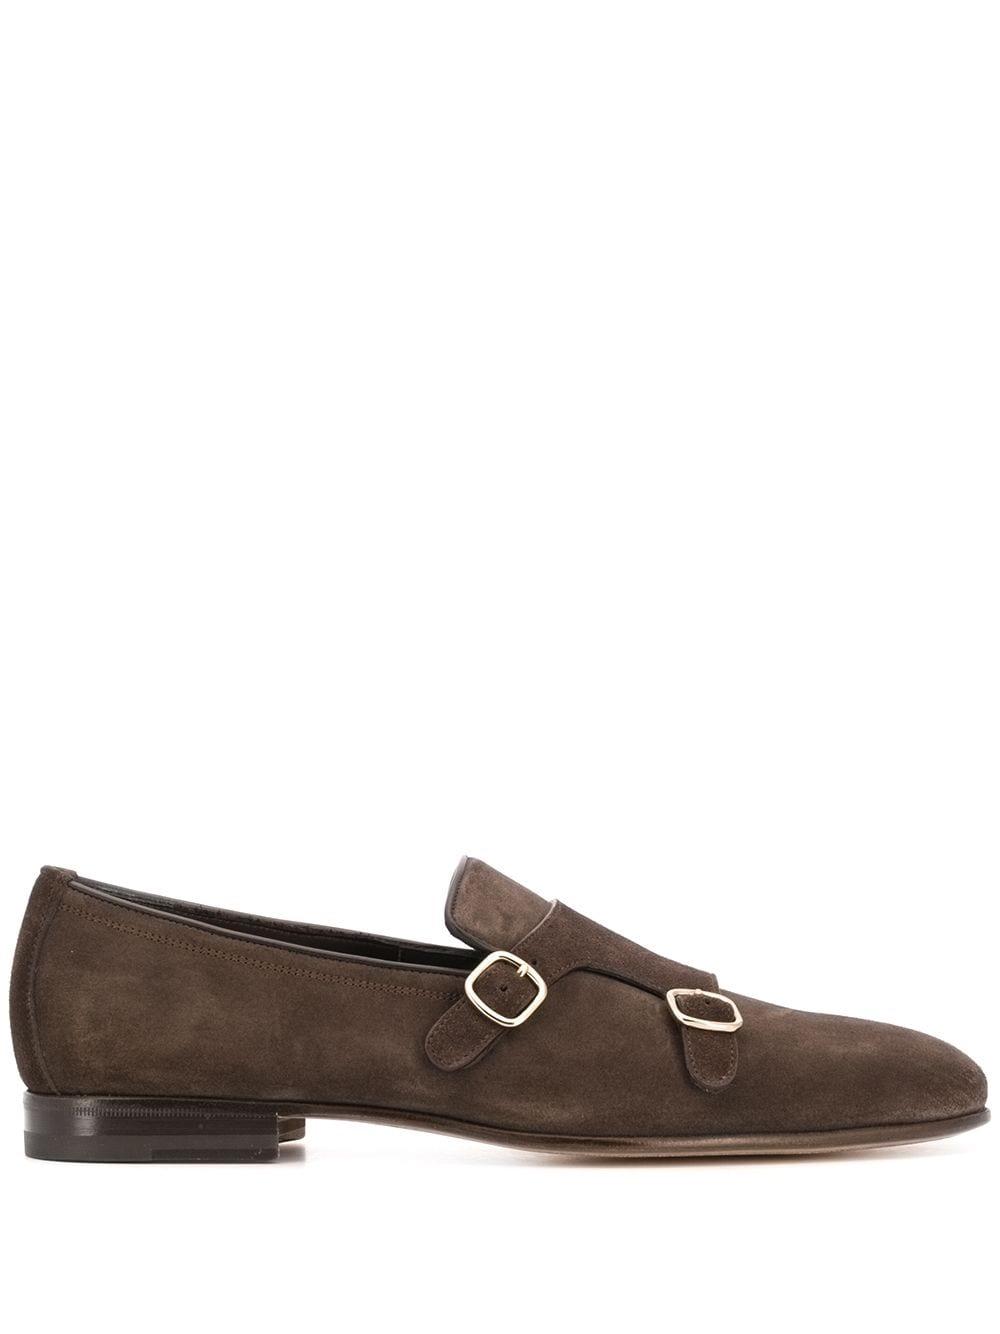 Santoni Leather Double-buckle Monk Shoes in Brown for Men - Lyst